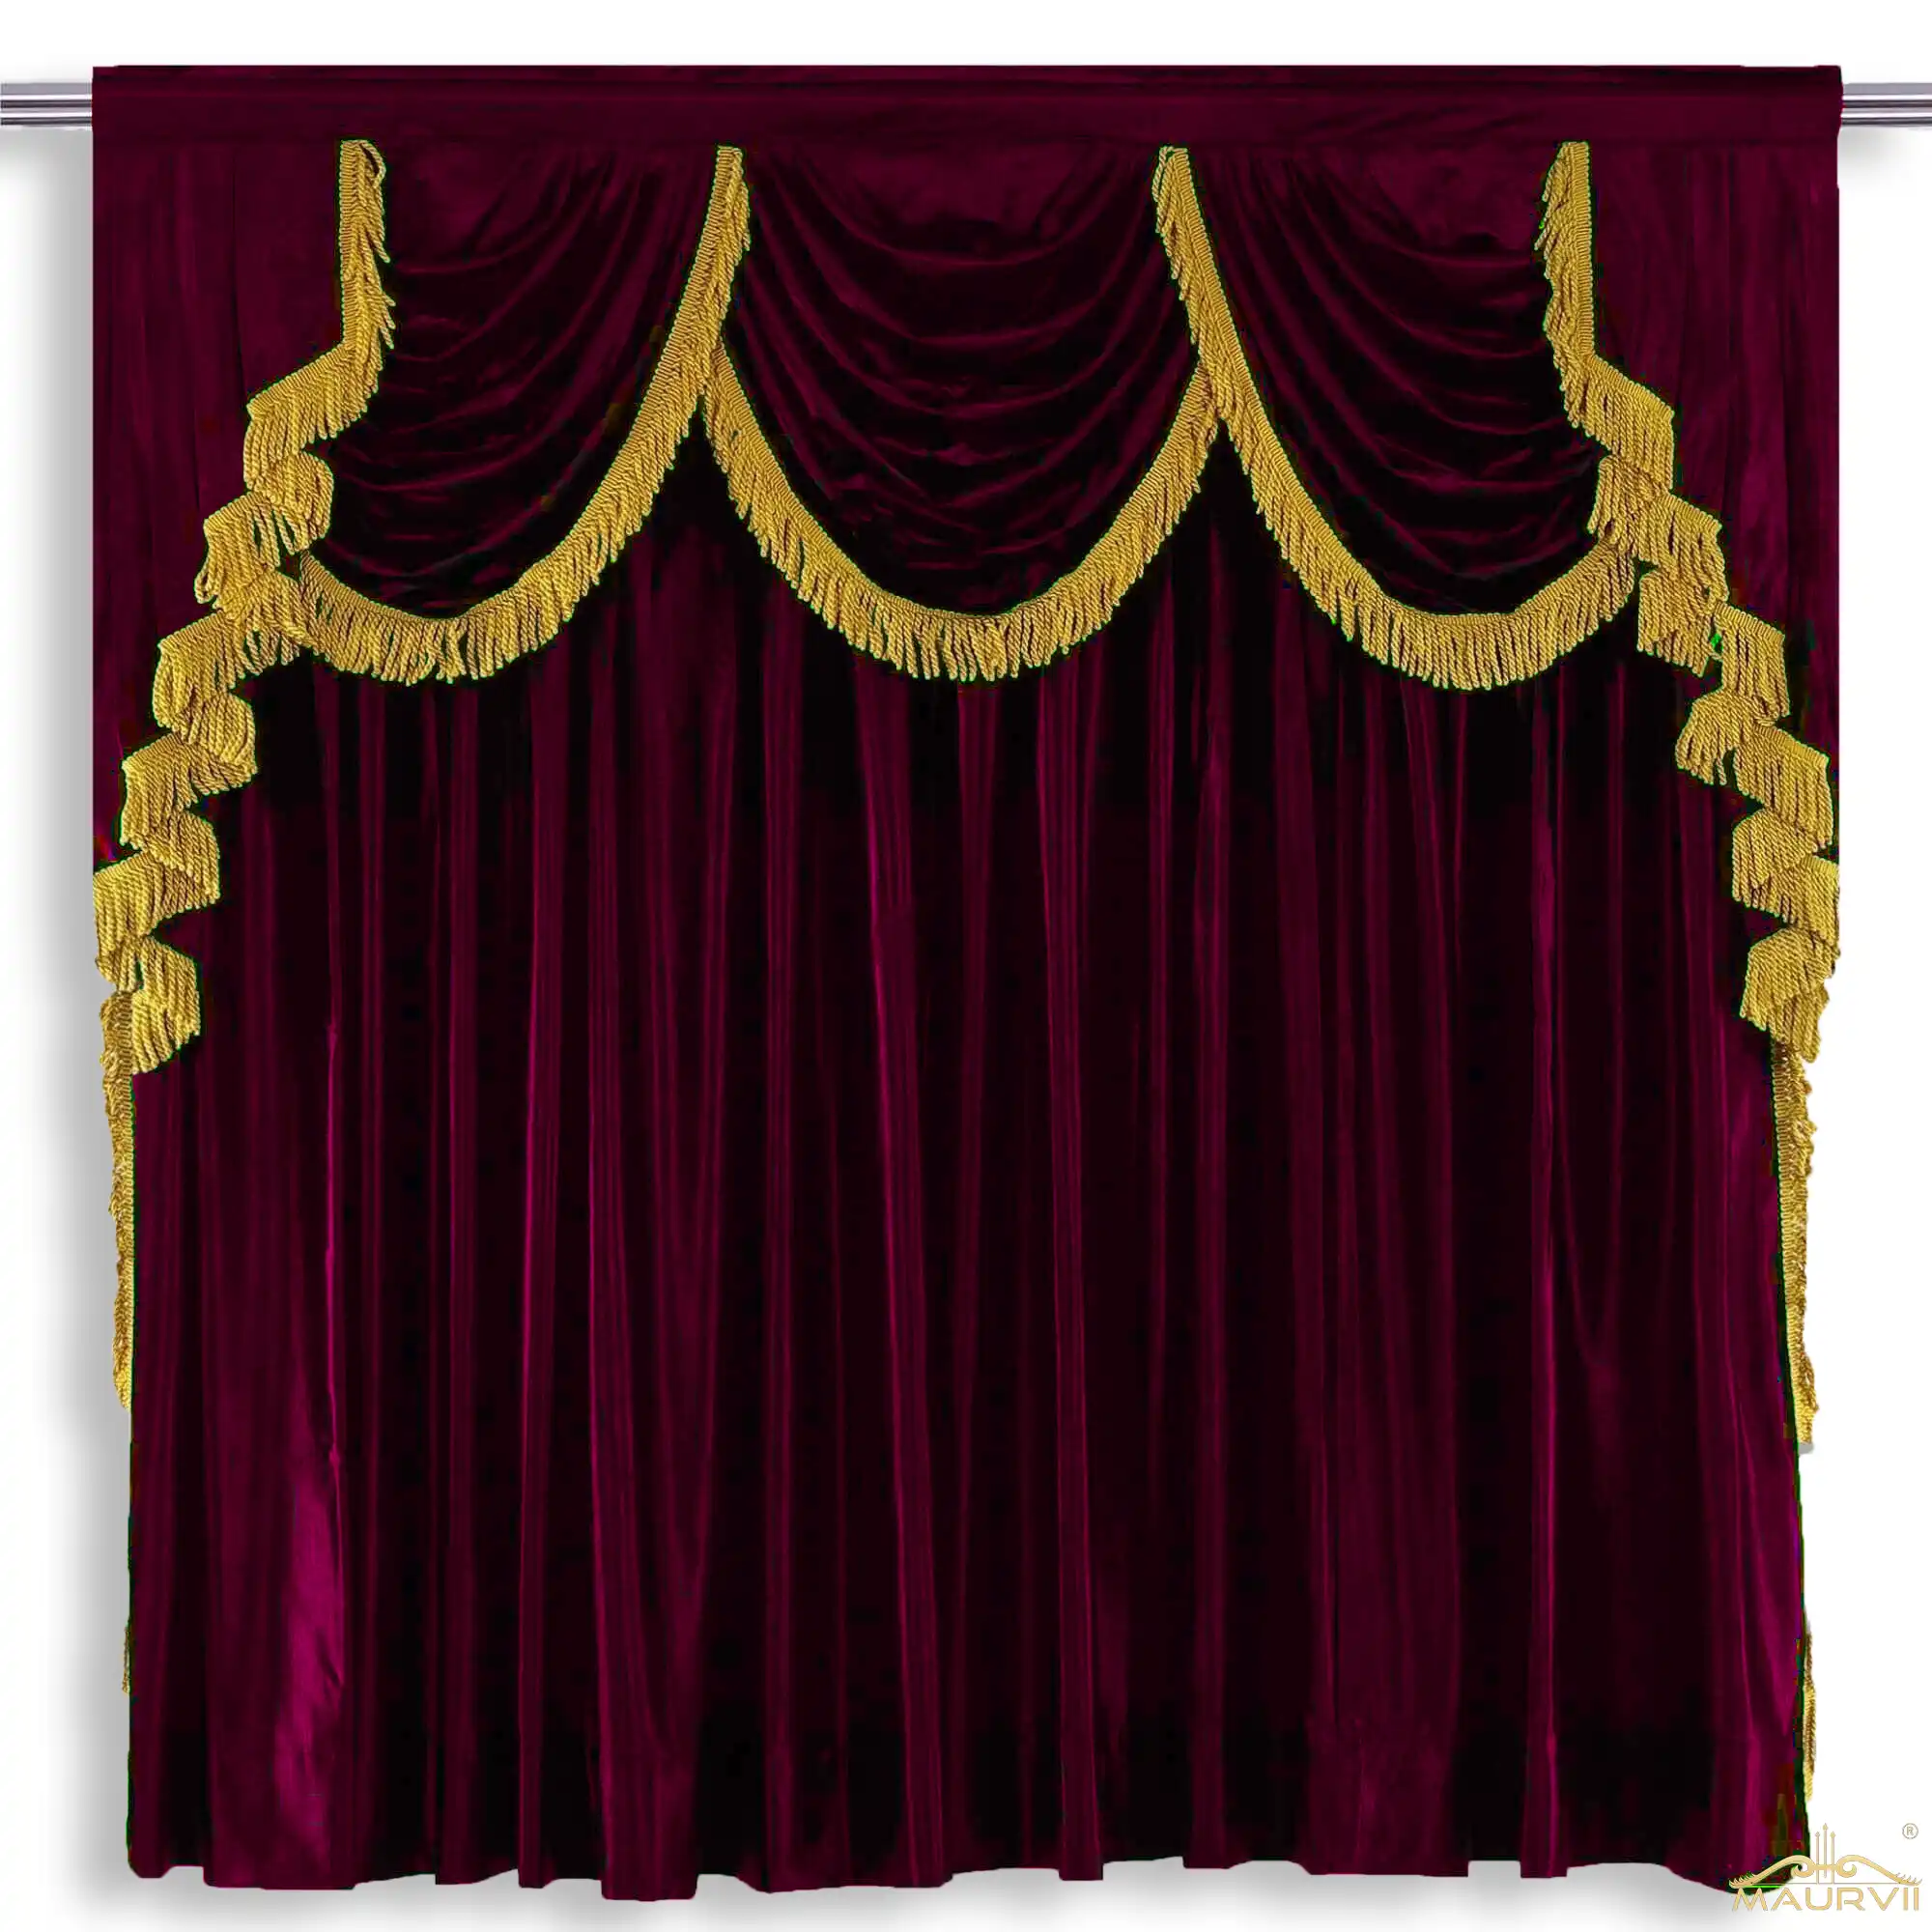 Burgundy stage curtains with decorative valance